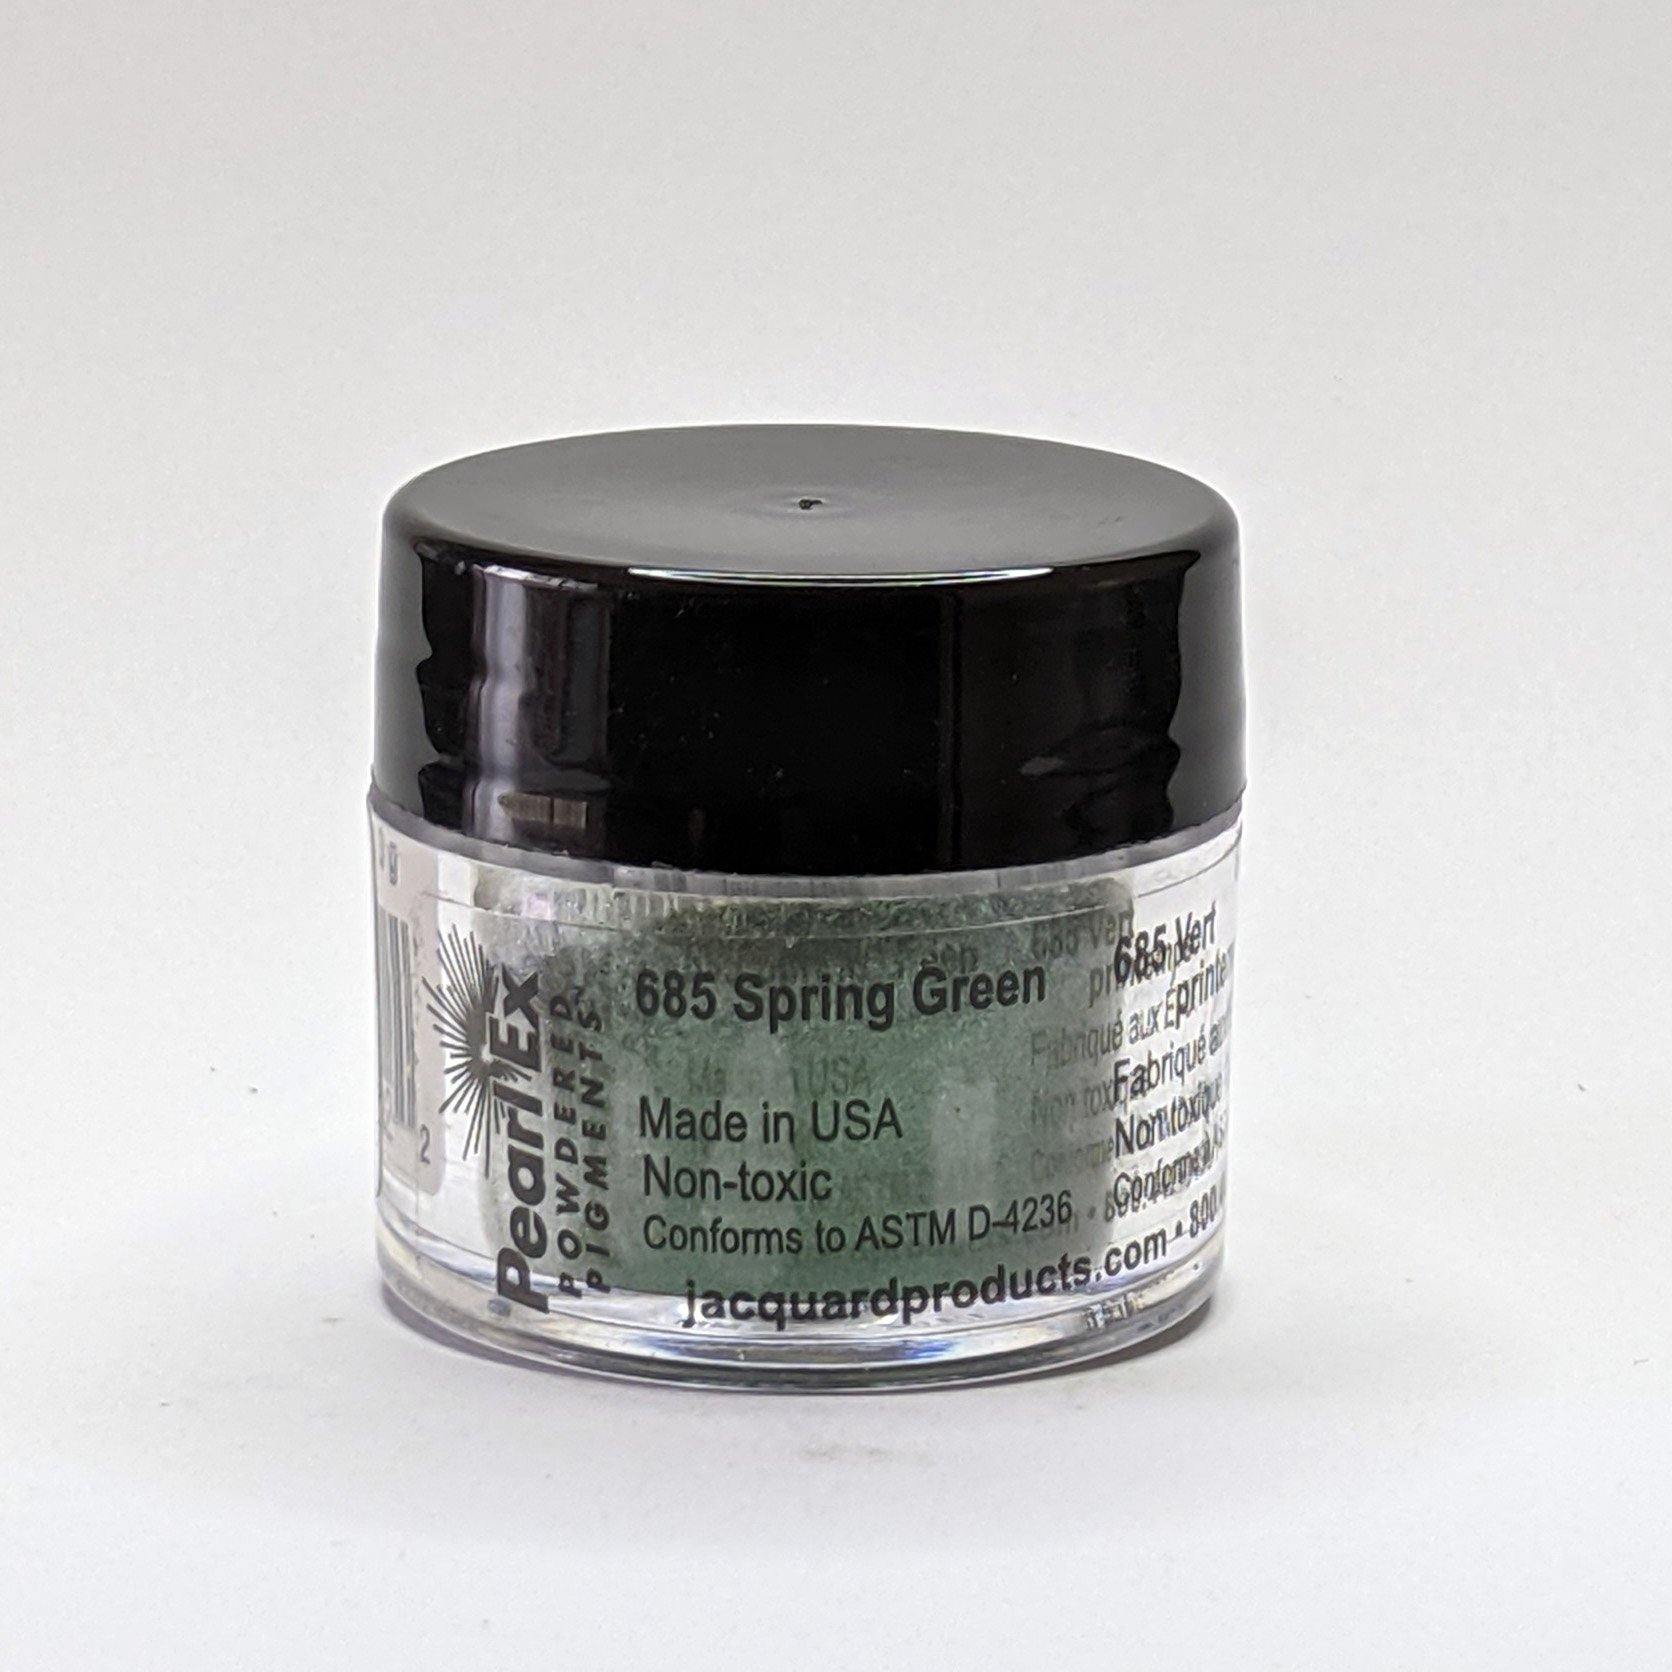 Spring Green Pearl Ex Pigment 3g - Poethan